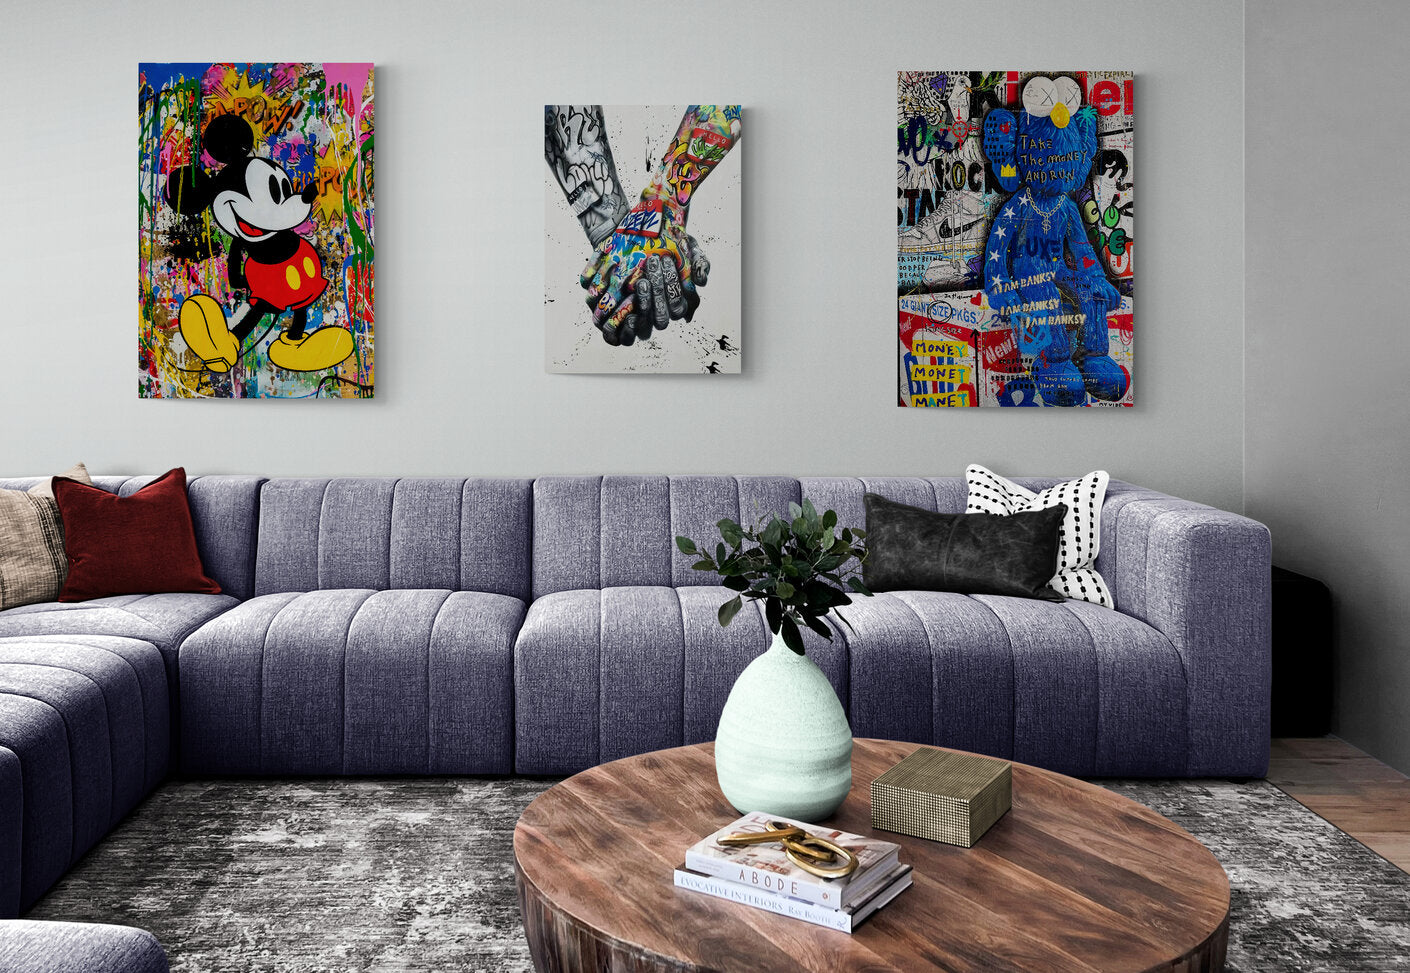 How to Decorate with Graffiti Wall Art